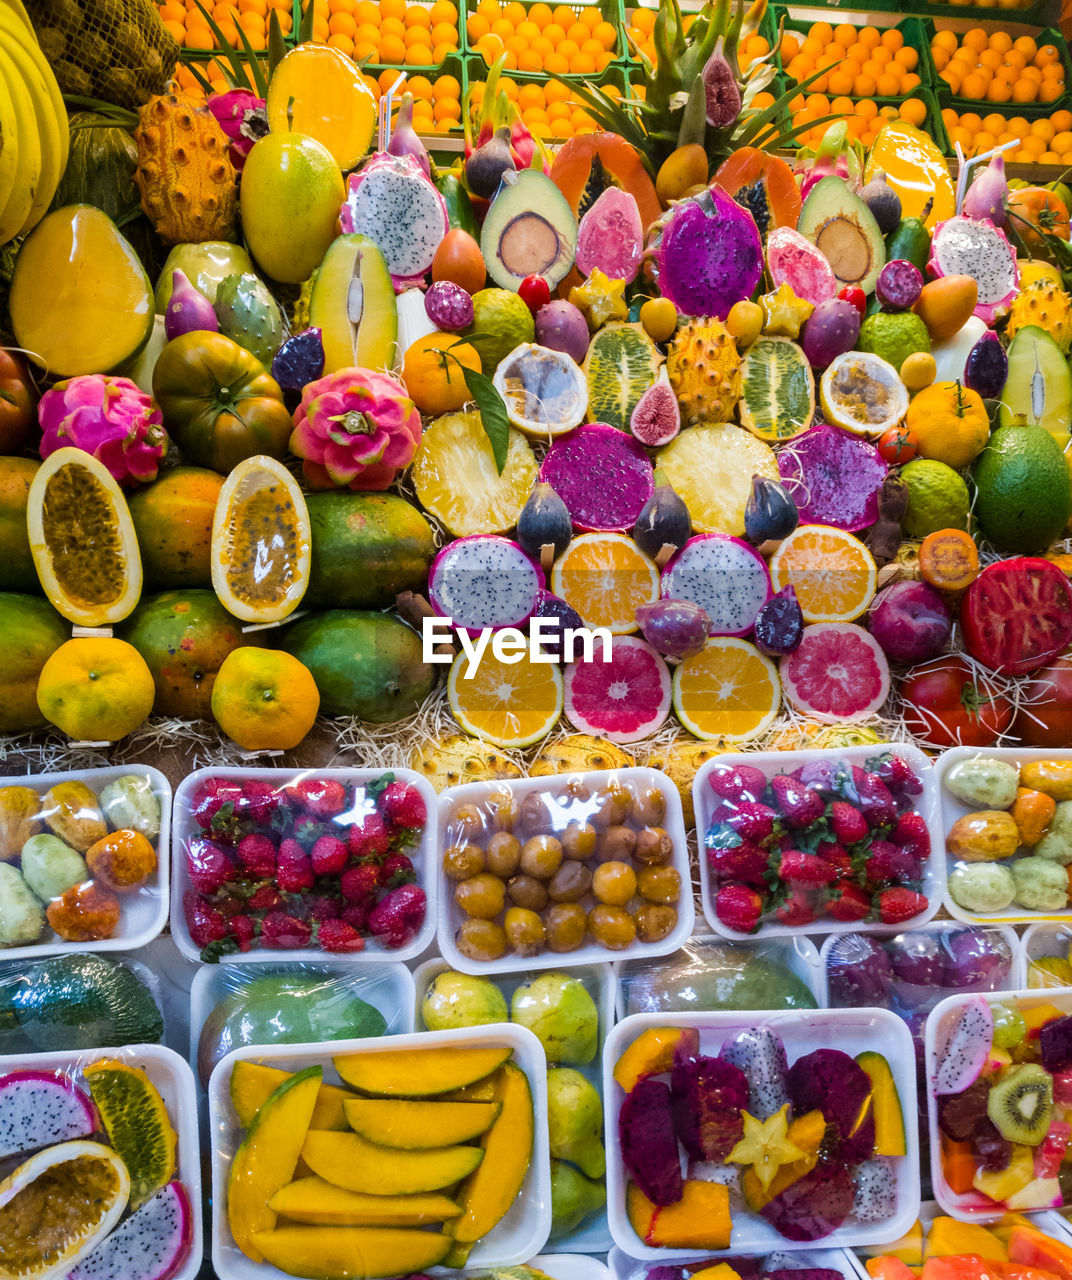 HIGH ANGLE VIEW OF MULTI COLORED FRUITS IN MARKET